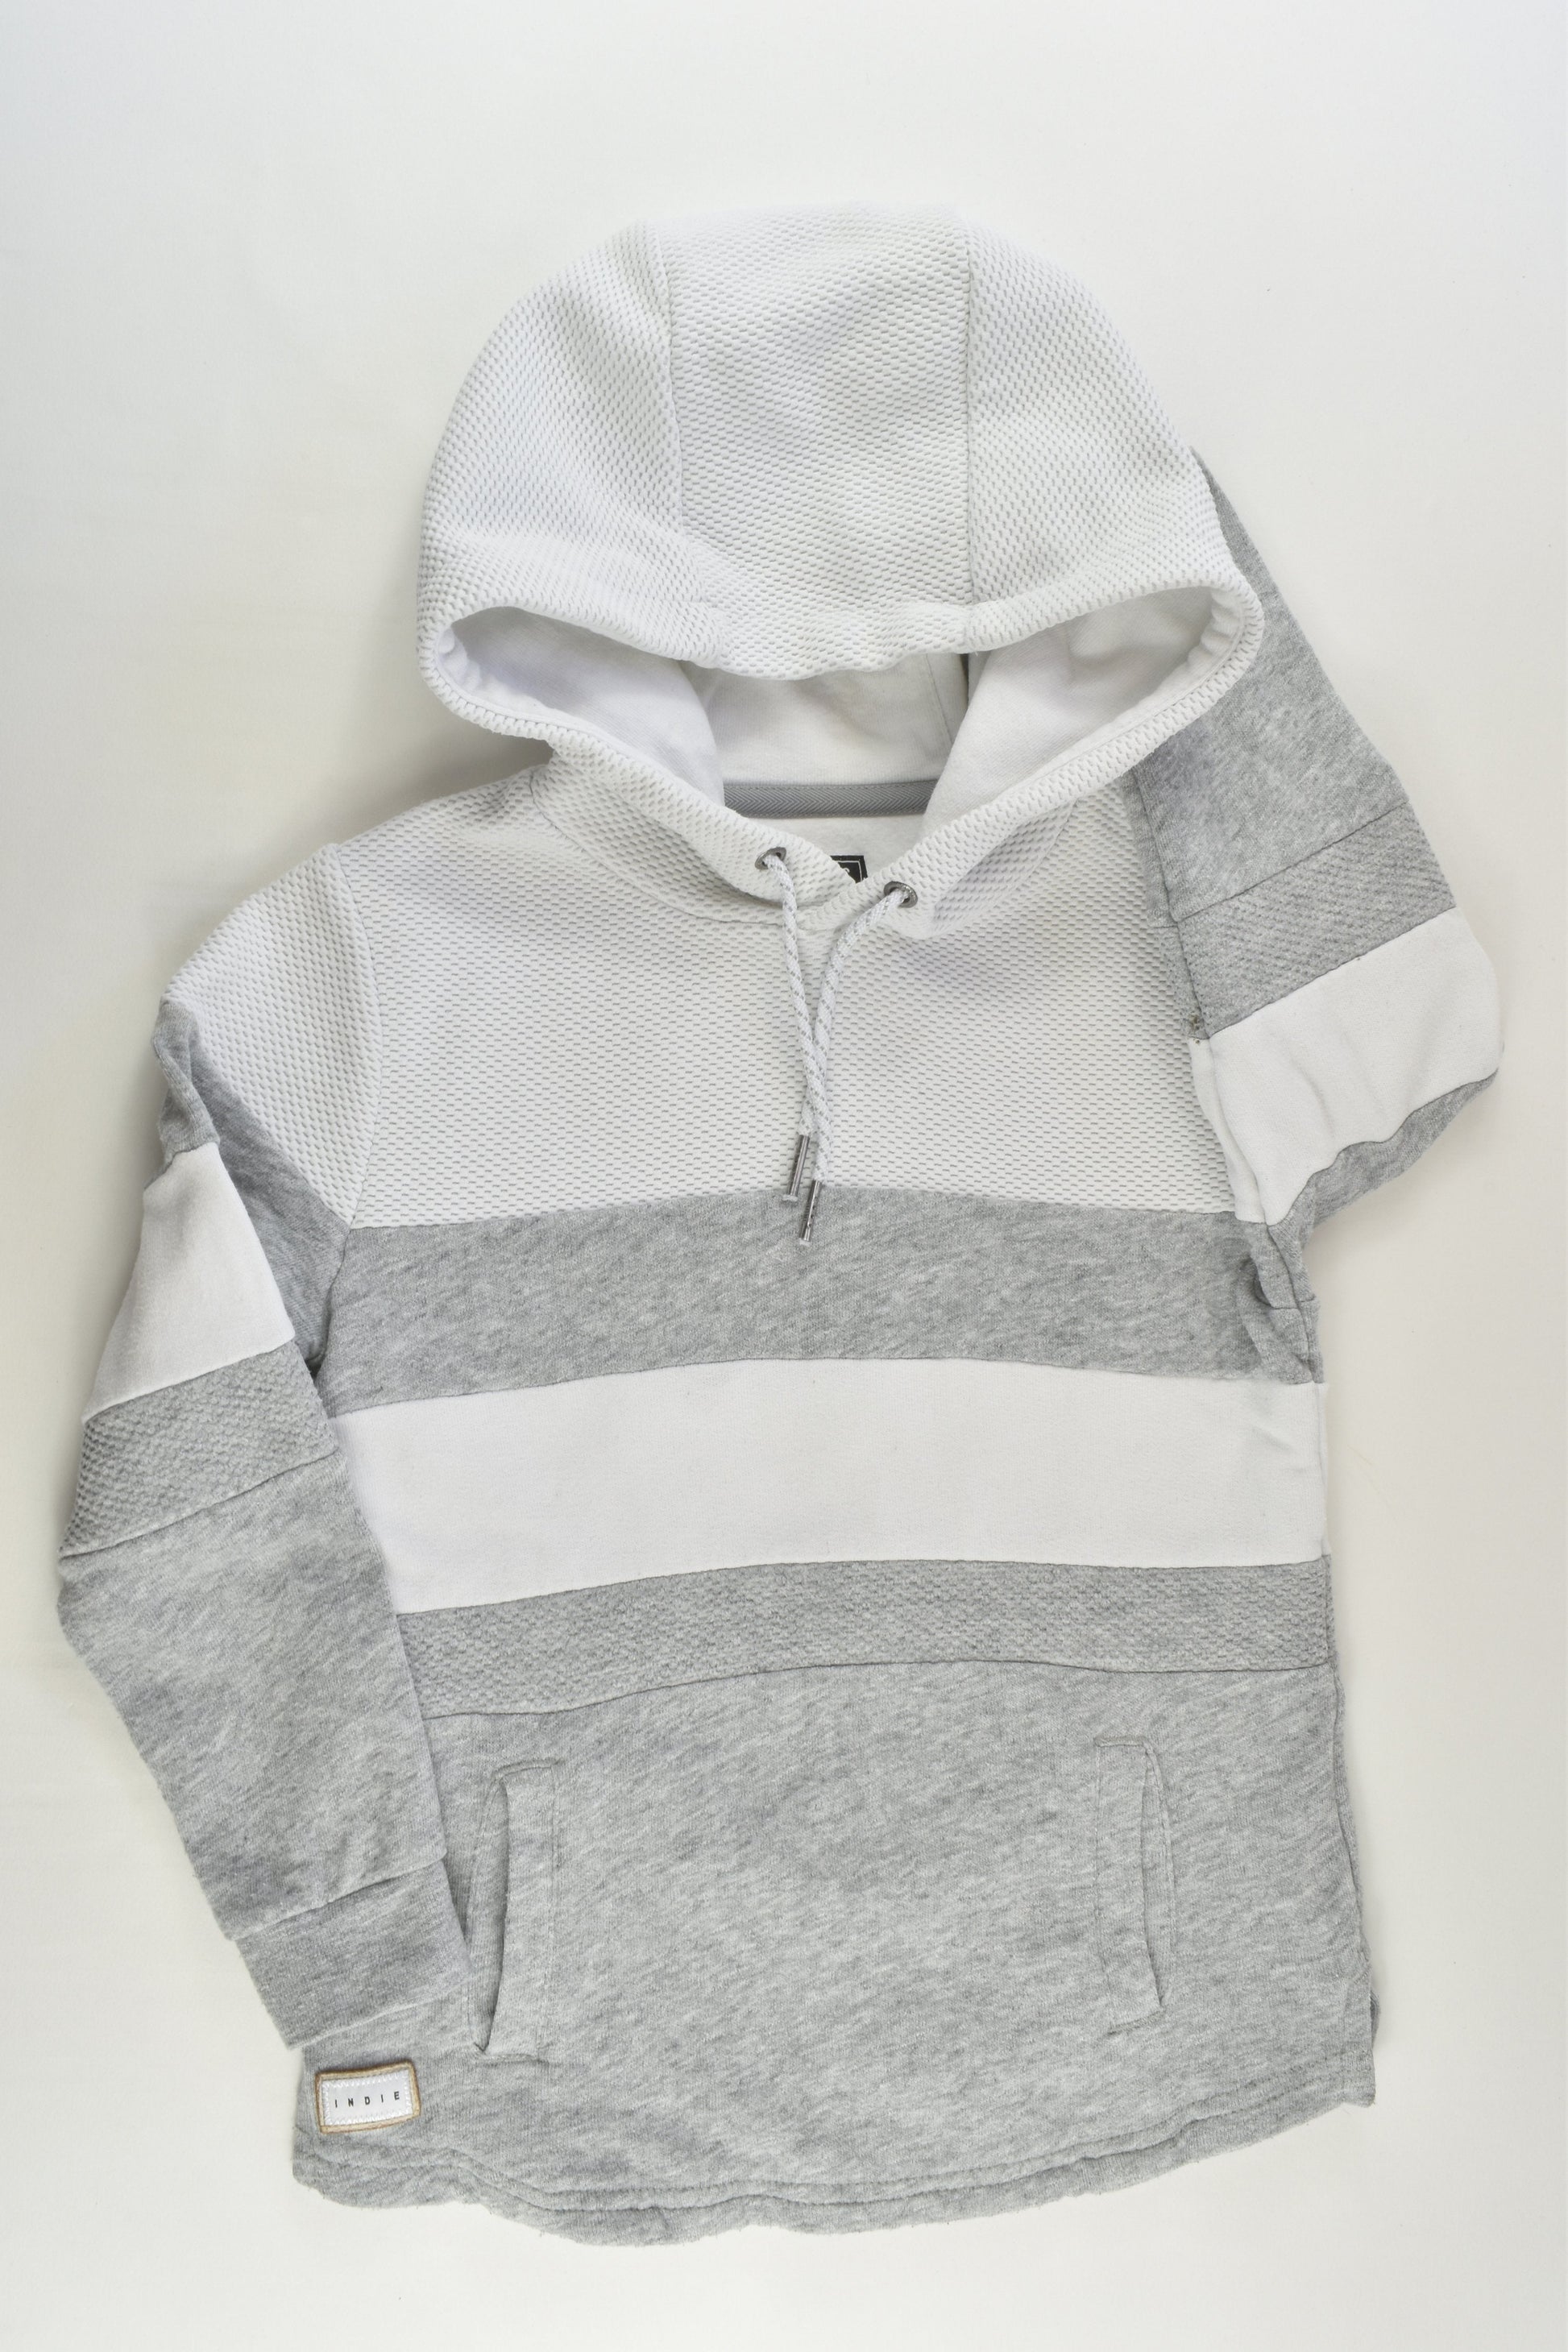 Indie Kids by Industrie Size 4 Hooded Jumper